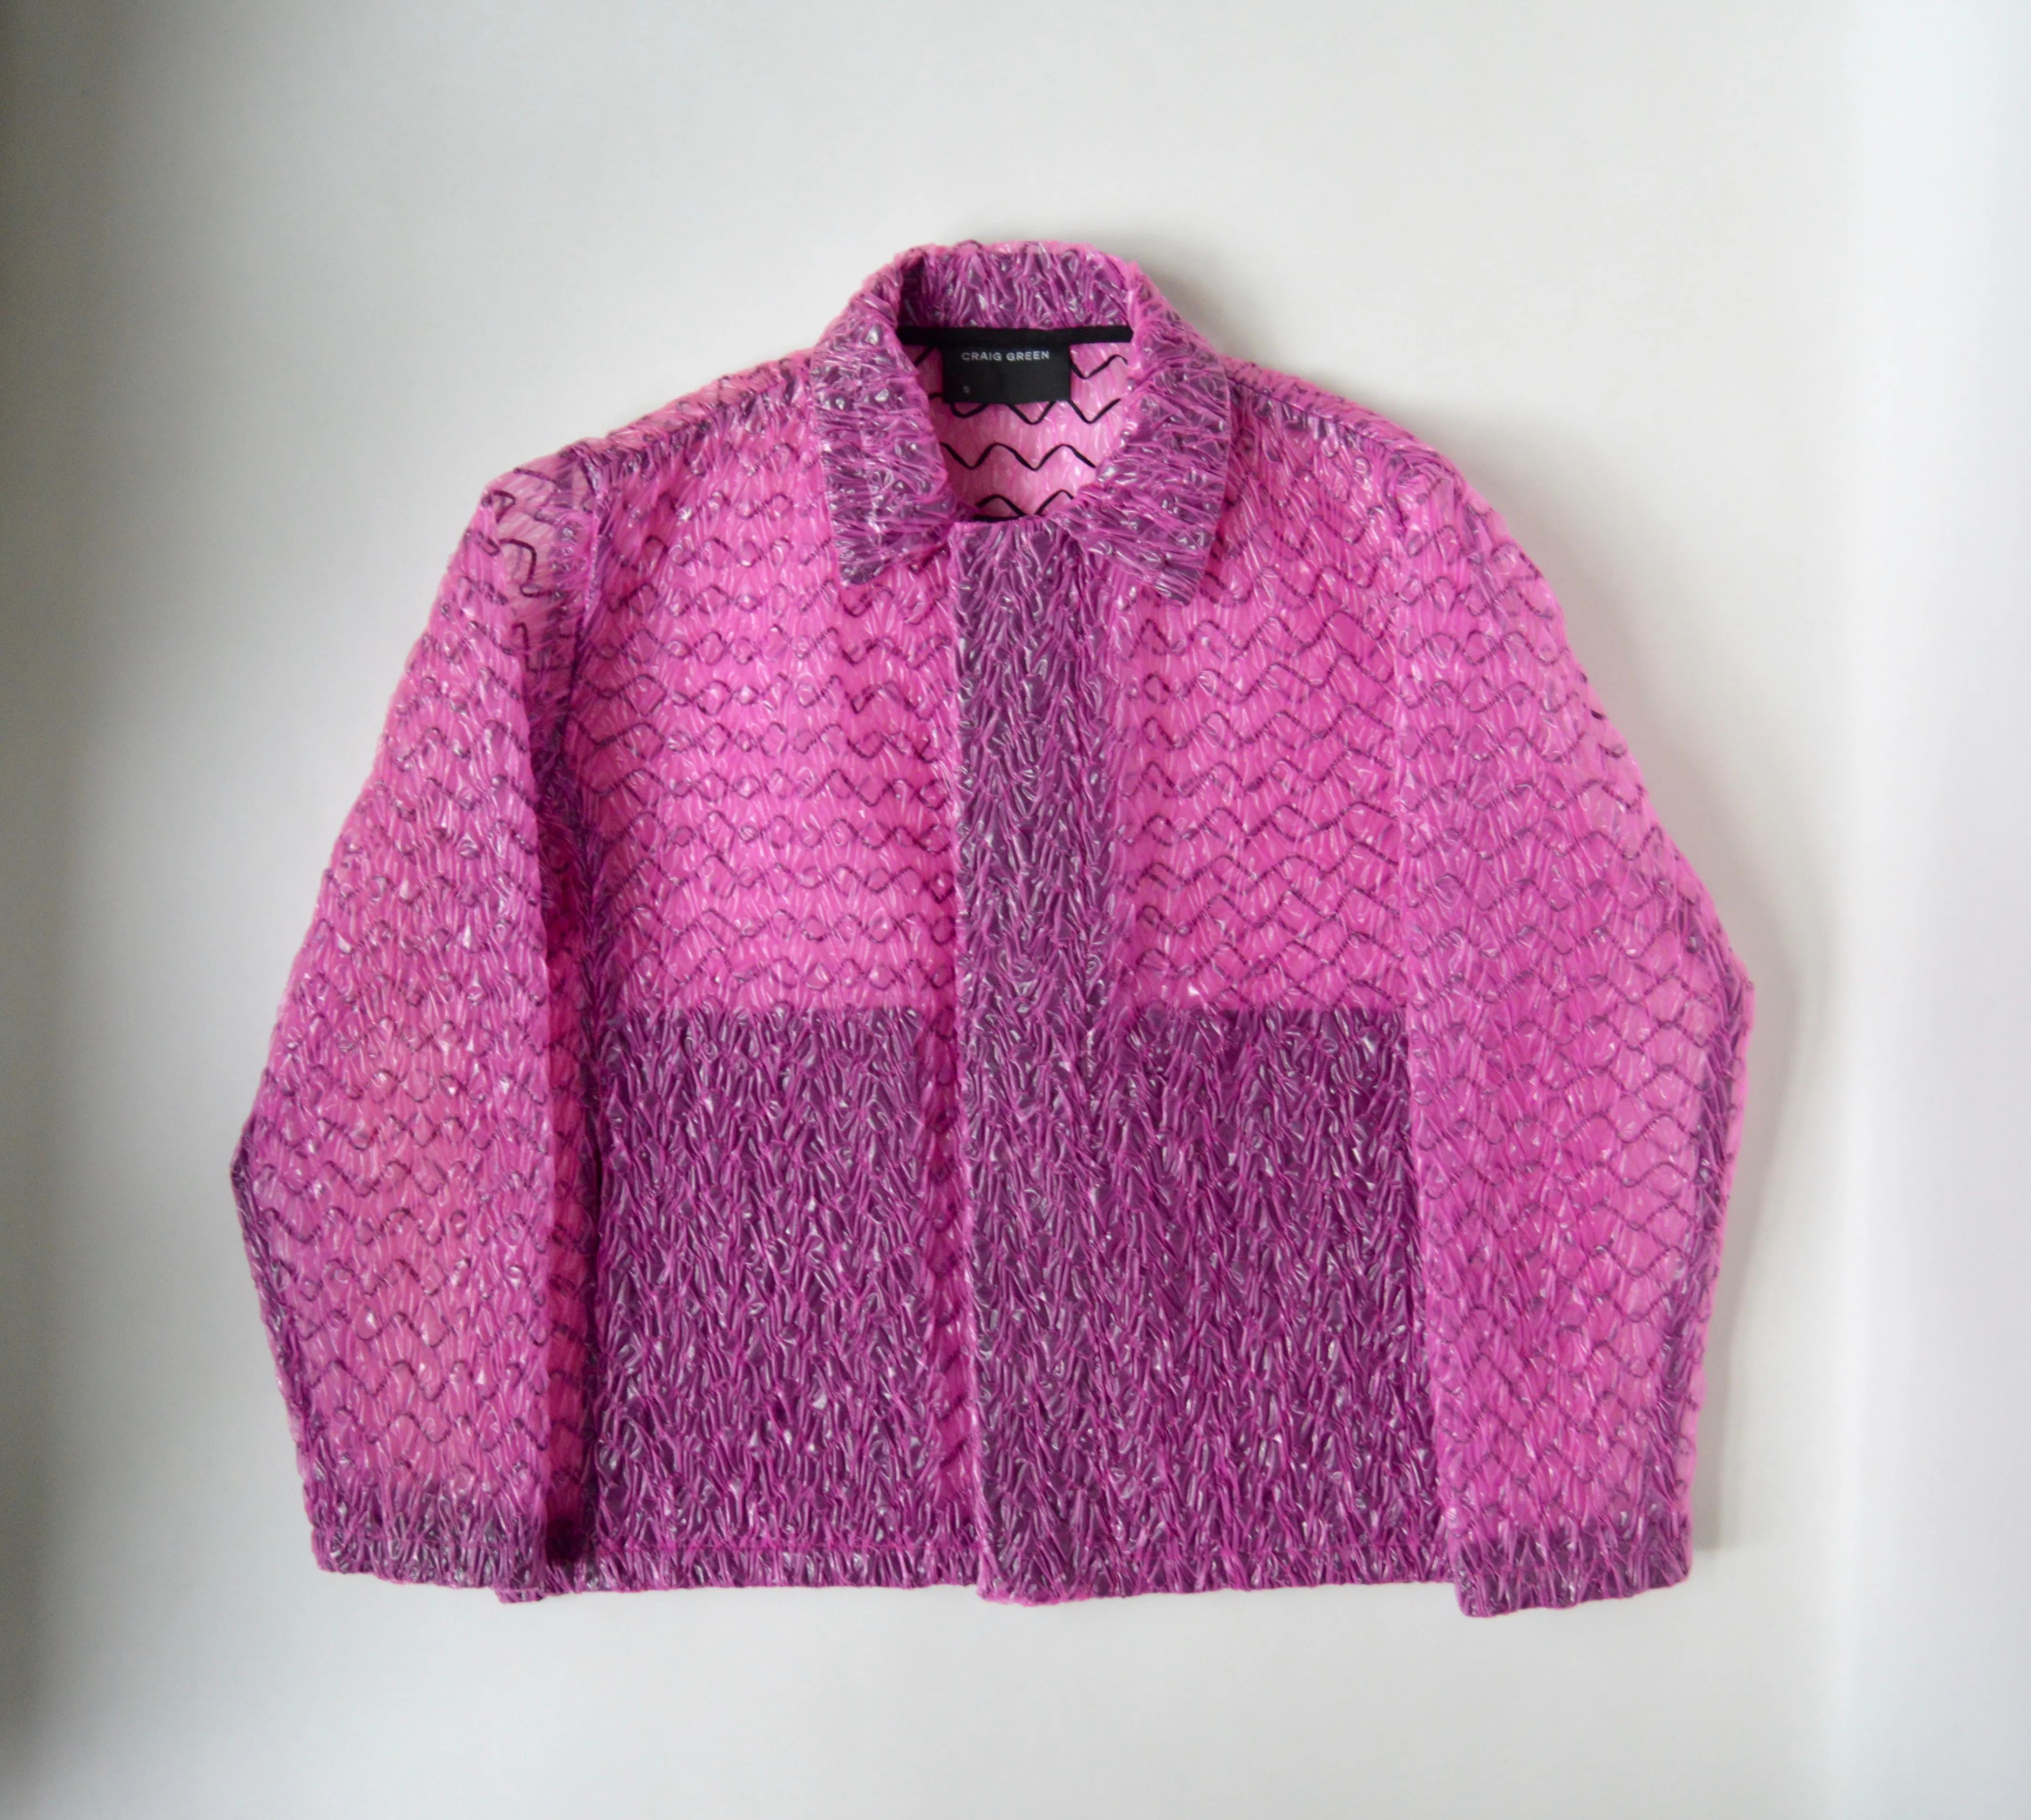 Craig Green S/S 20 Pink Bubble Wrap Jacket | Grailed | Grailed